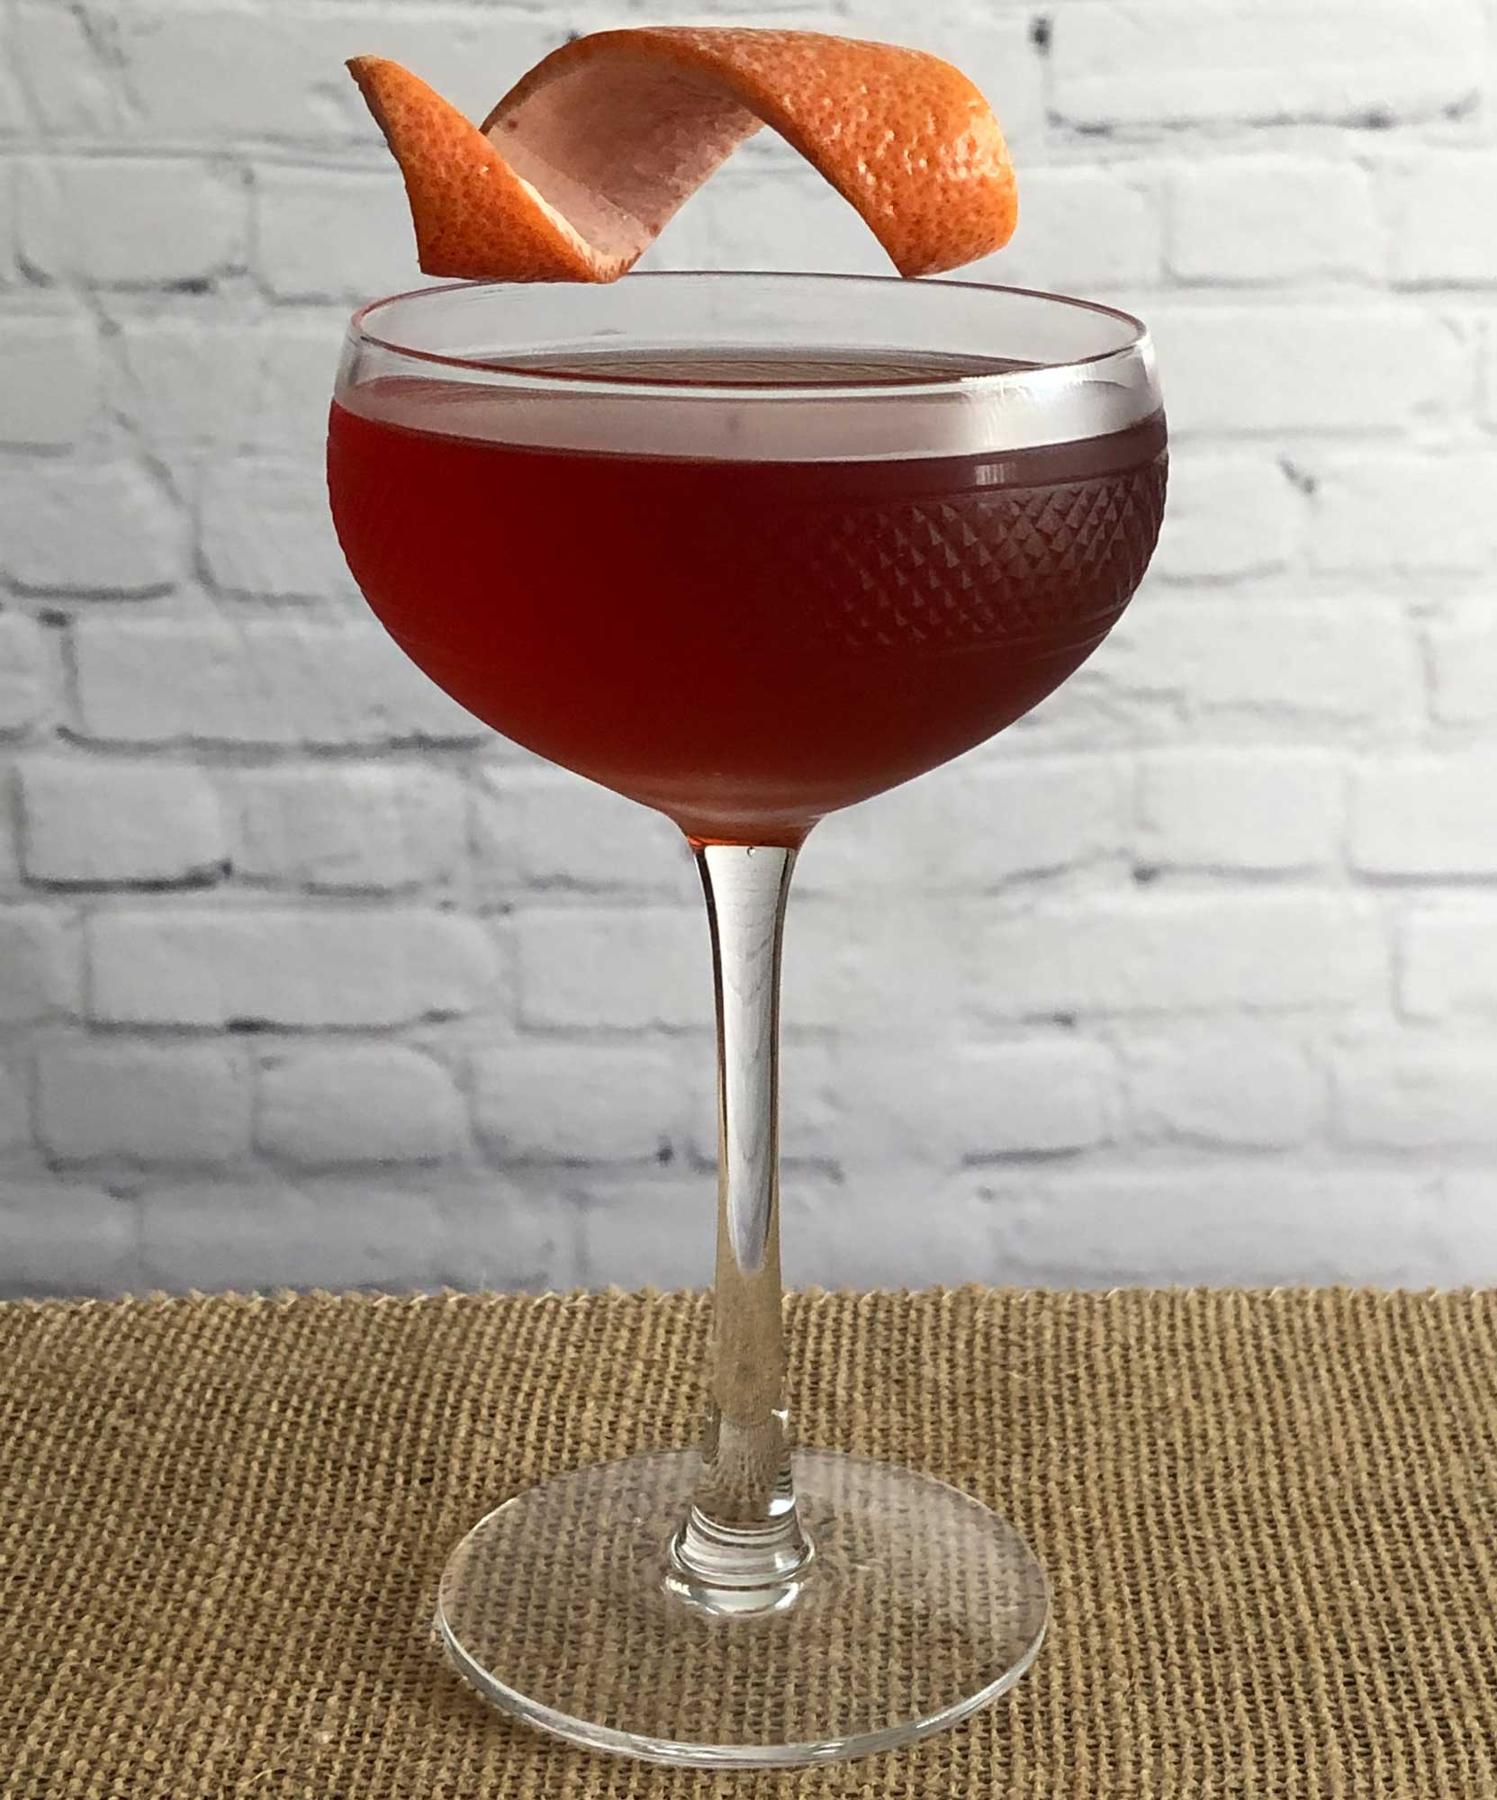 An example of the Bobby Byrrhns, the mixed drink (drink) featuring scotch whisky, Byrrh Grand Quinquina, Bénédictine, orange bitters, Angostura bitters, and grapefruit twist; photo by Lee Edwards